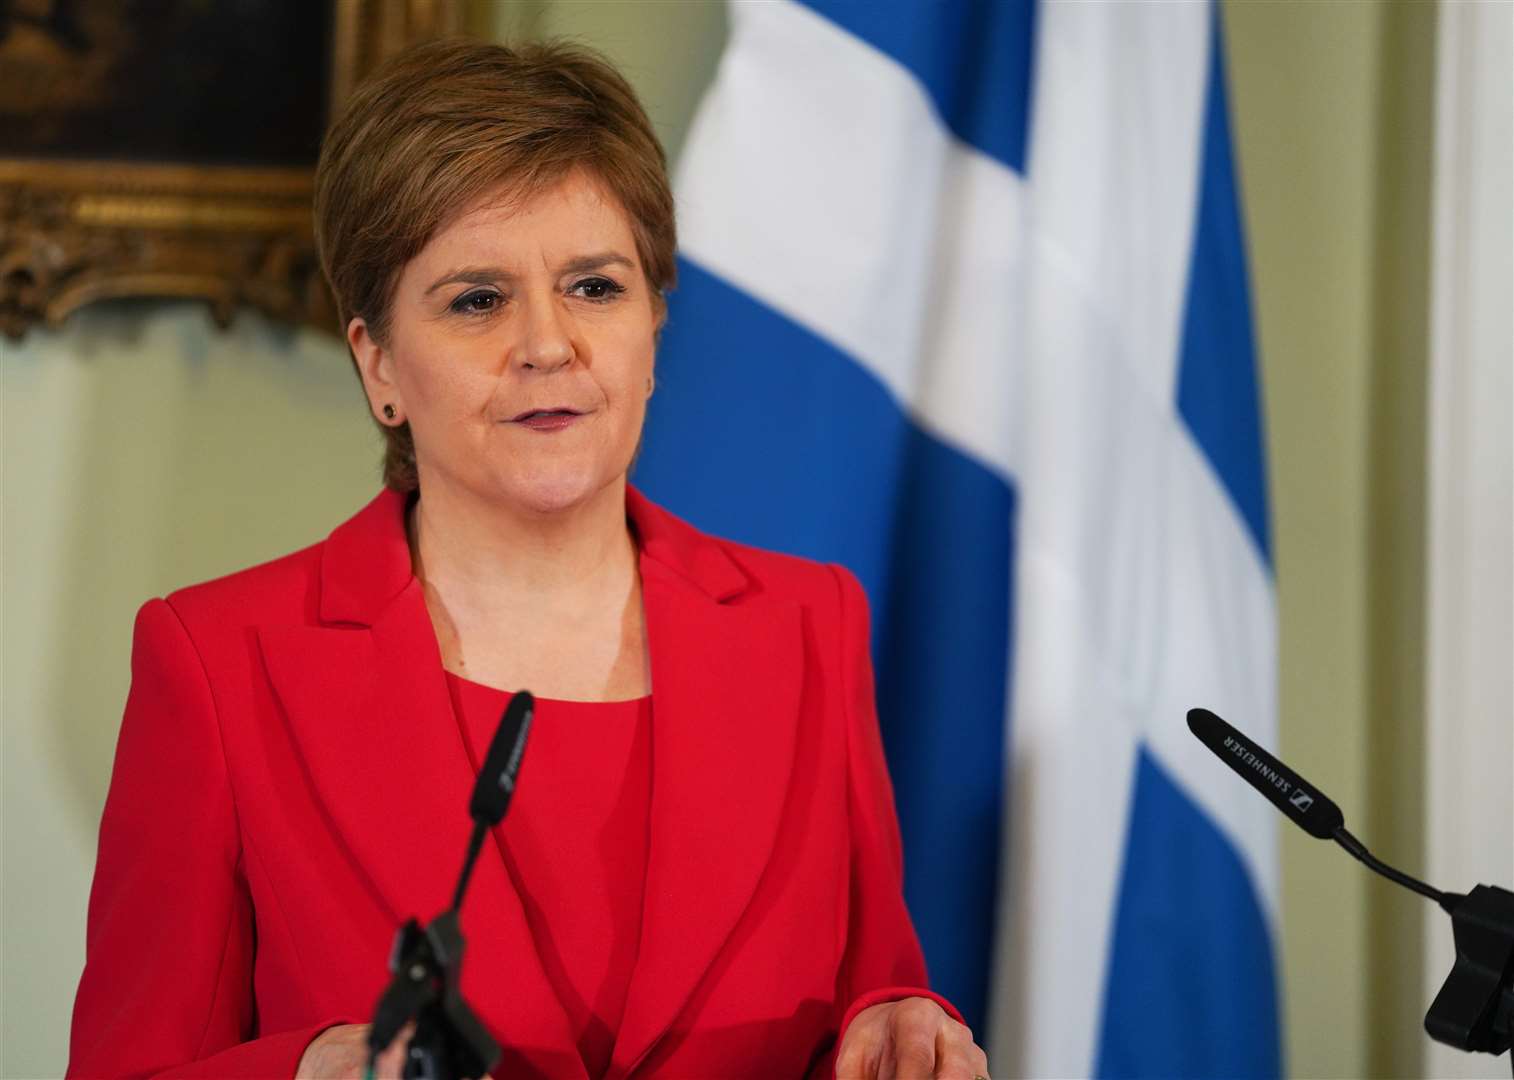 Nicola Sturgeon pictured as she announced her resignation as First Minister.